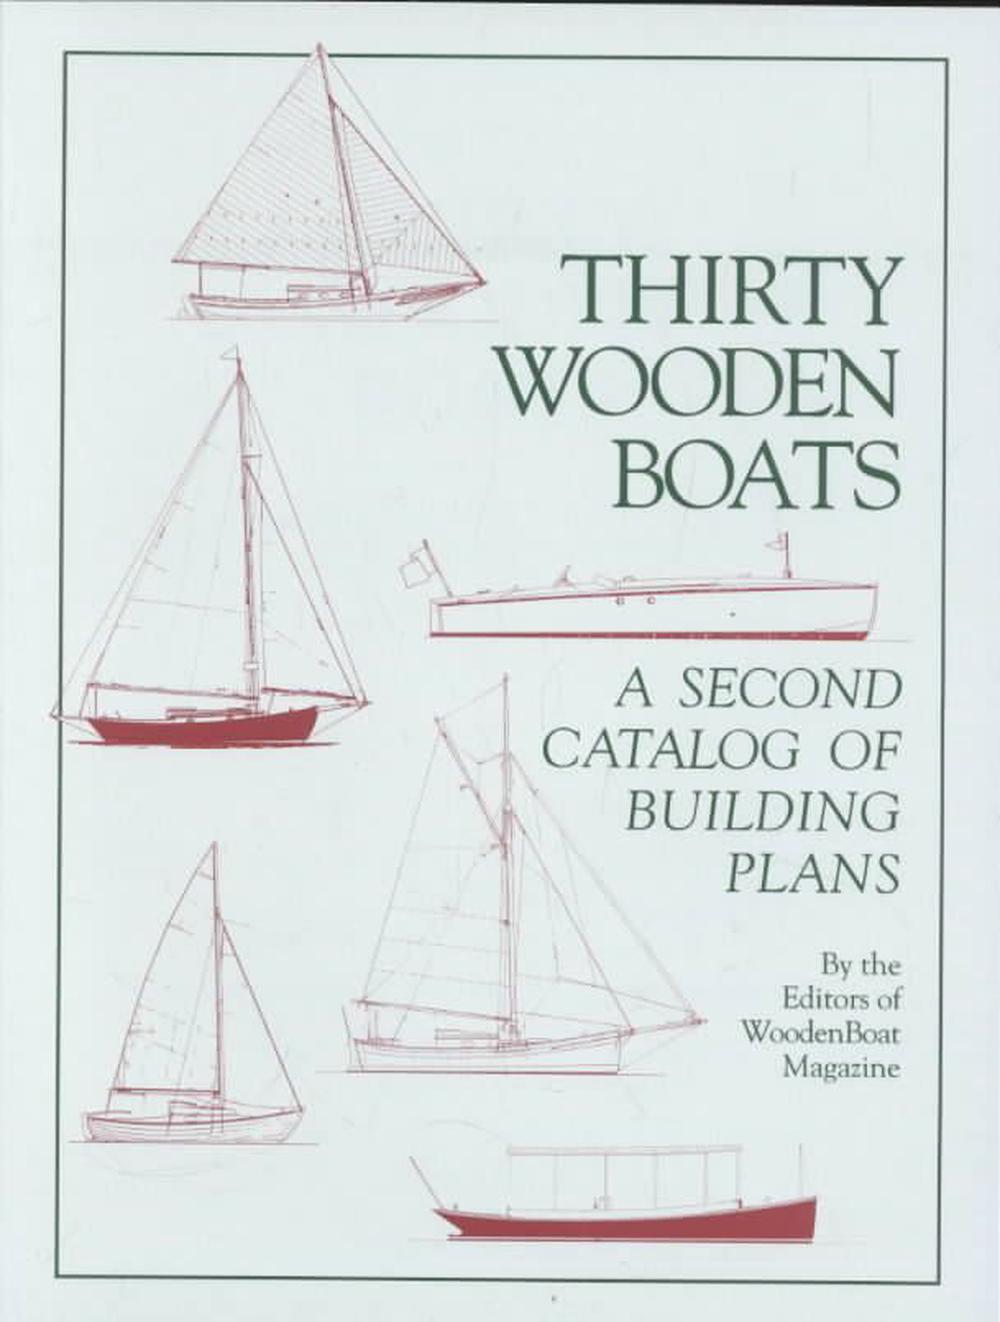 Thirty Wooden Boats: A Second Catalog of Building Plans by Wooden Boat Magazine 9780937822159 | eBay